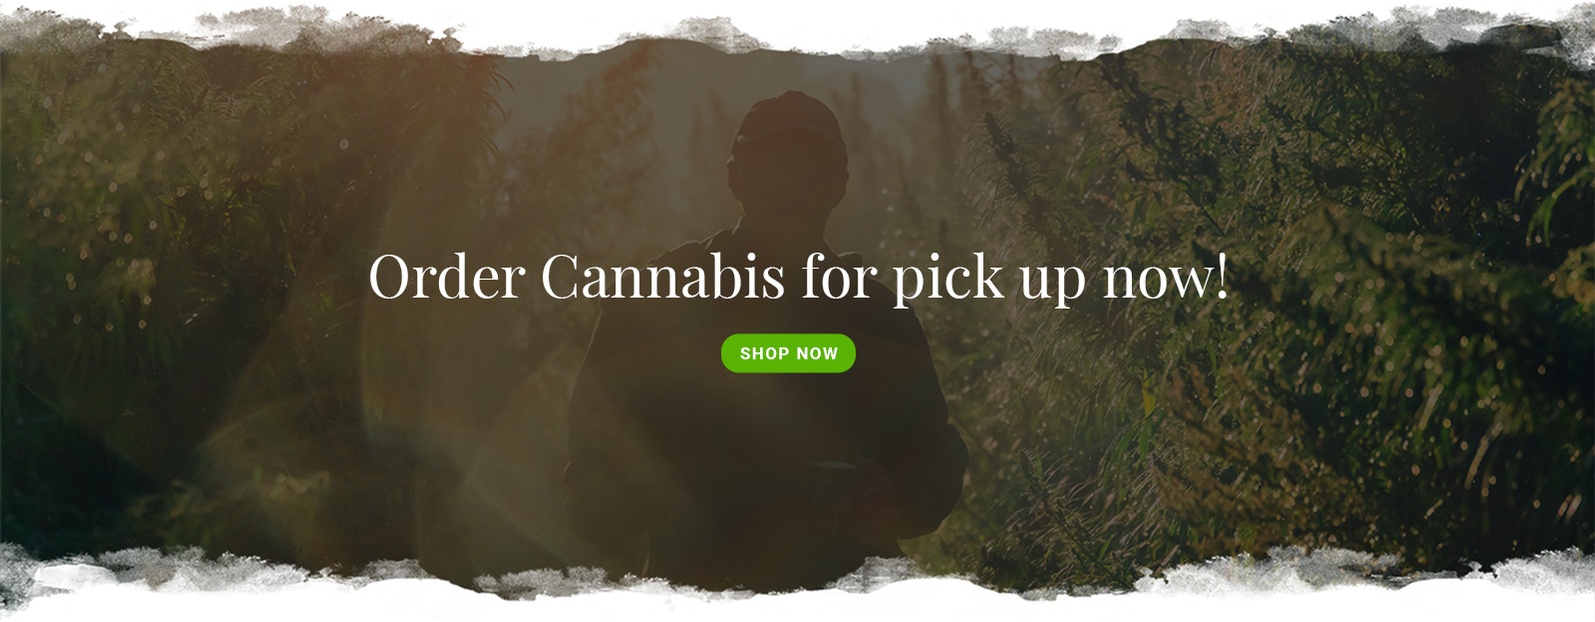 Order Cannabis for pick up now - Weed Store